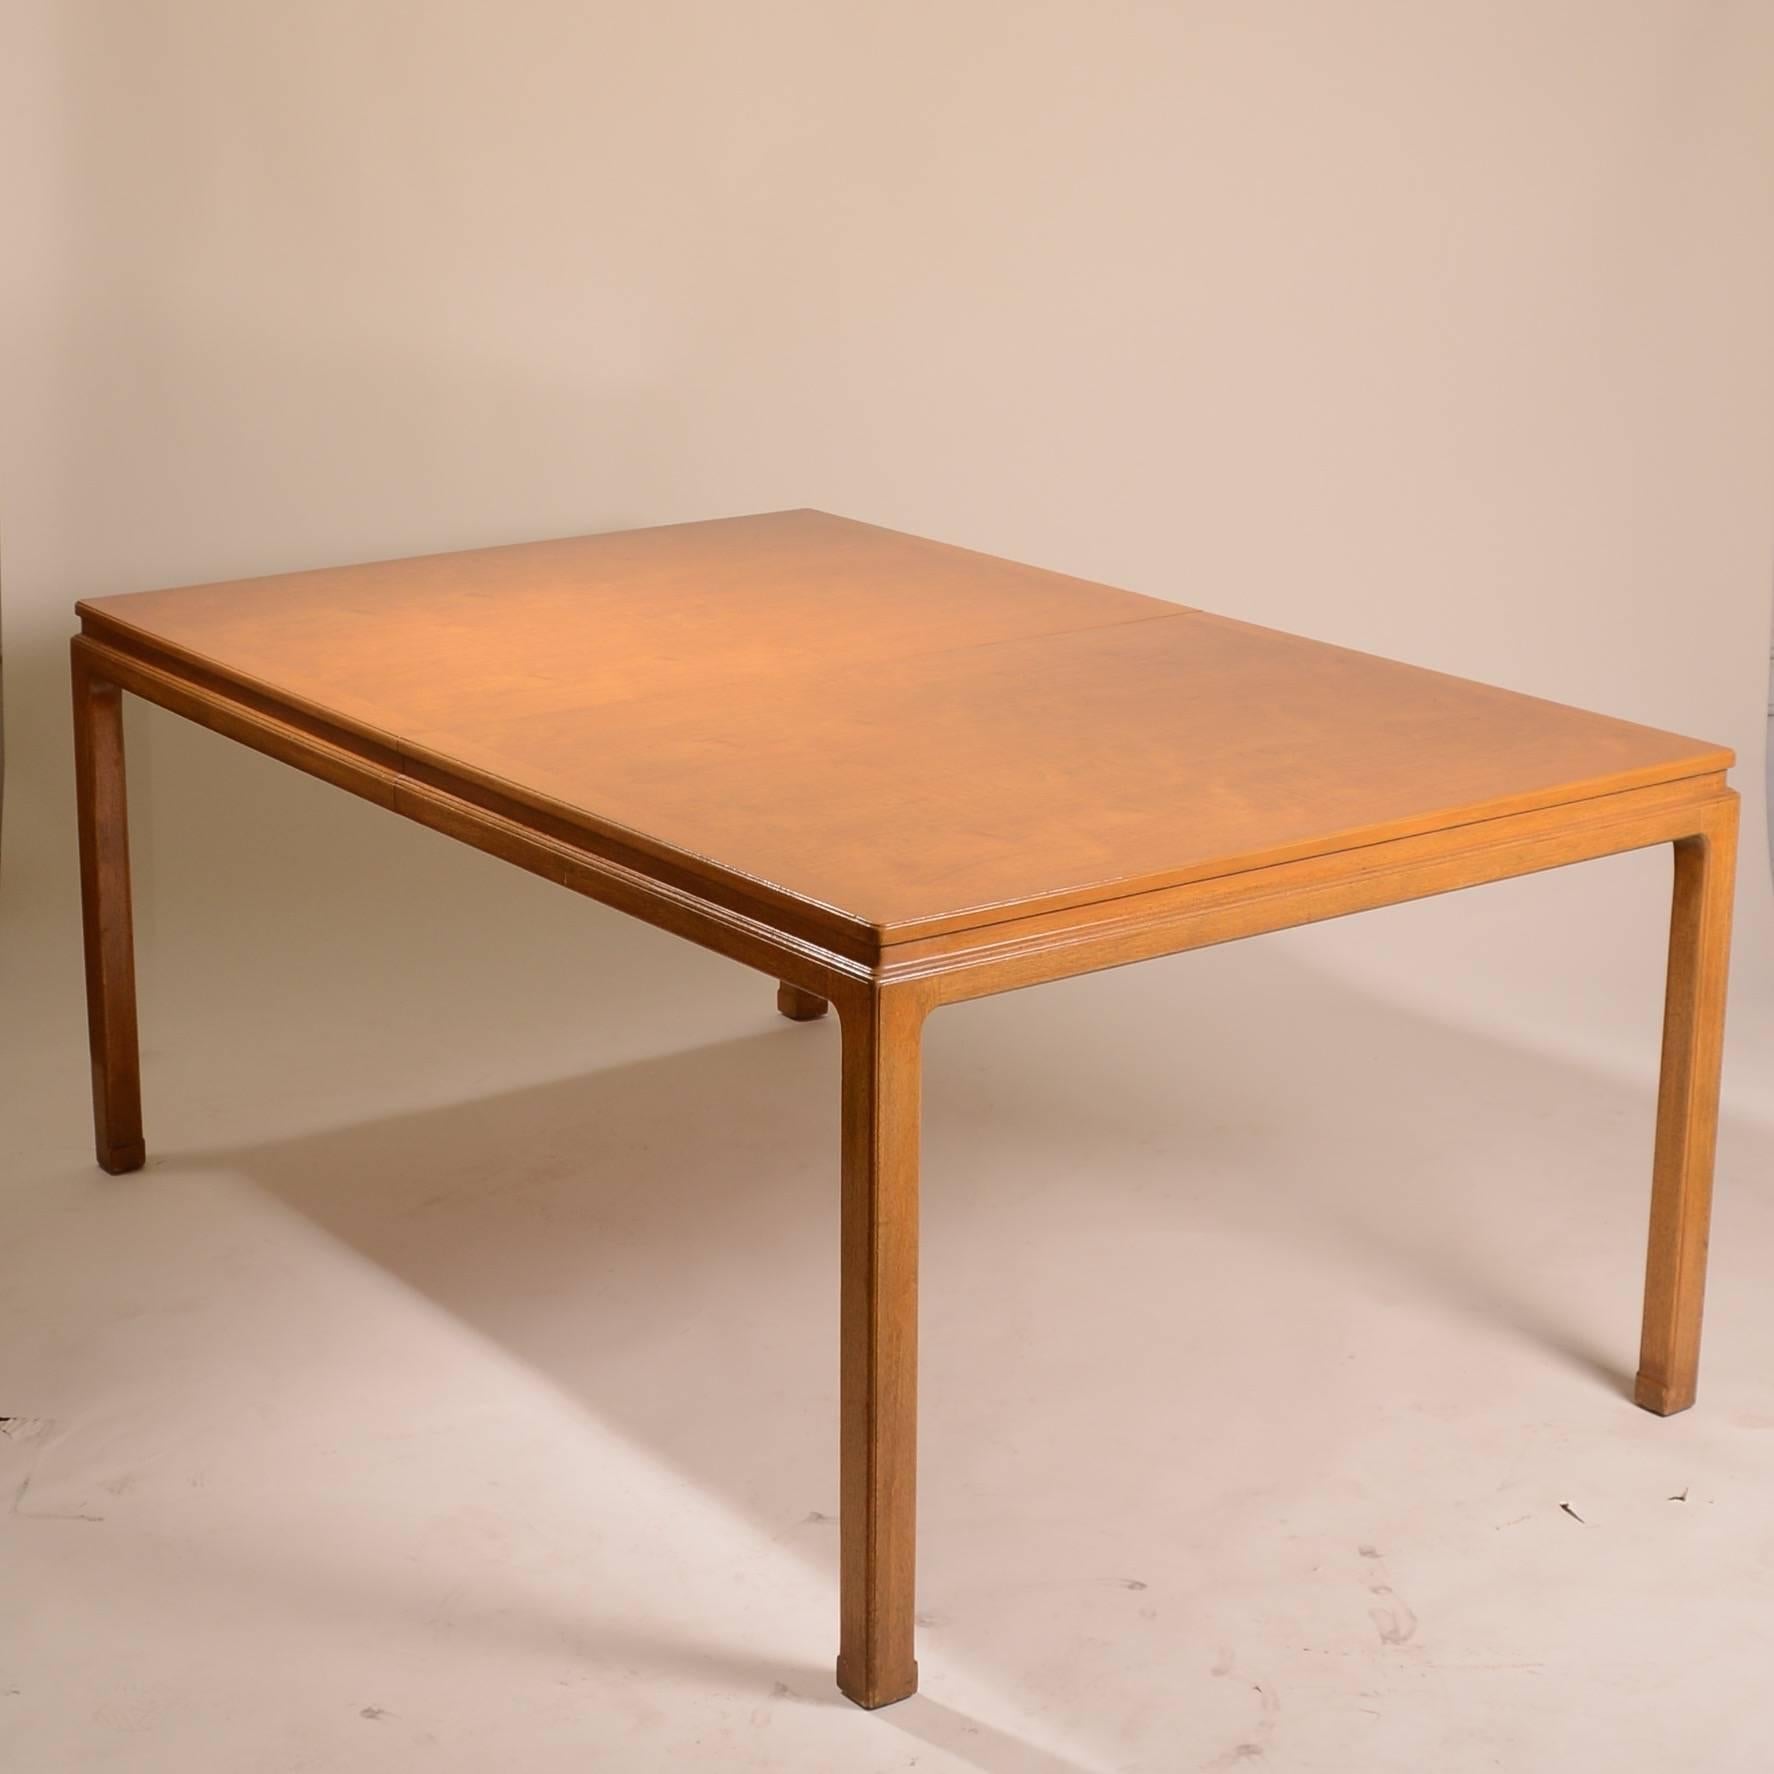 Rare mahogany dining table by Edward Wormley for Dunbar. This large expandable table retains its original finish which makes the mahogany radiant. The set includes two 12